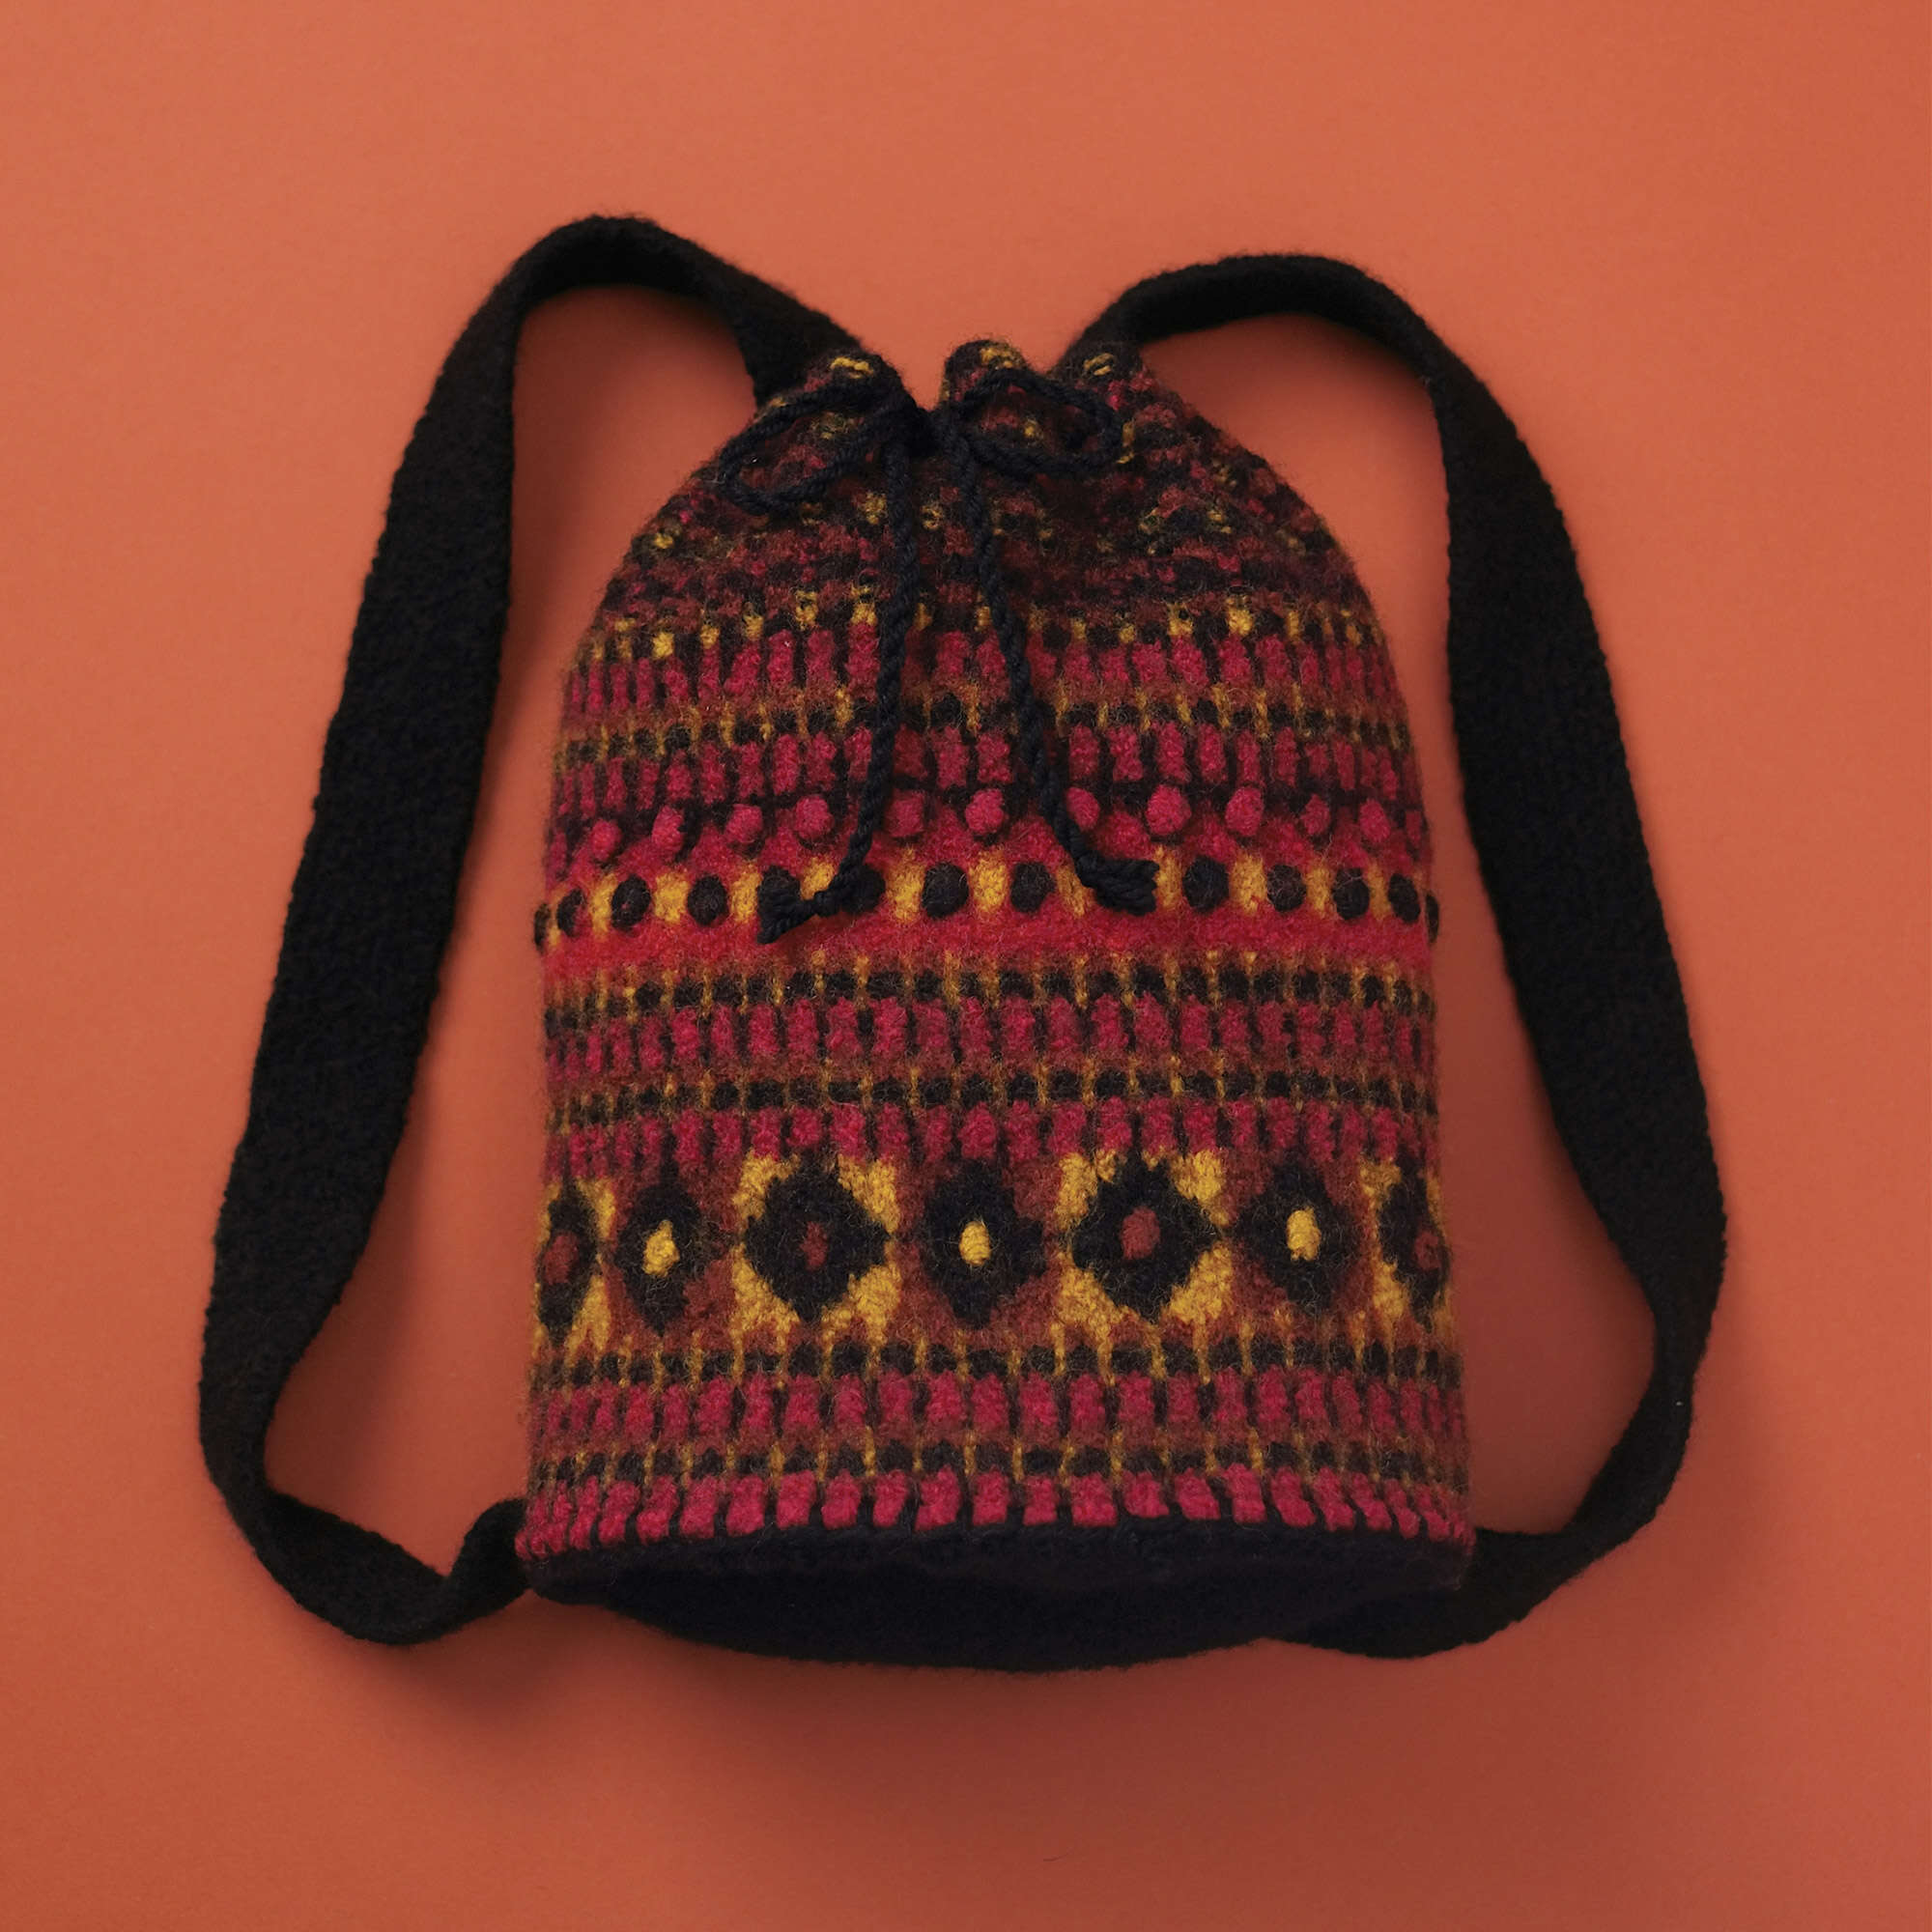 Patons Unfelted Tribal Duffle